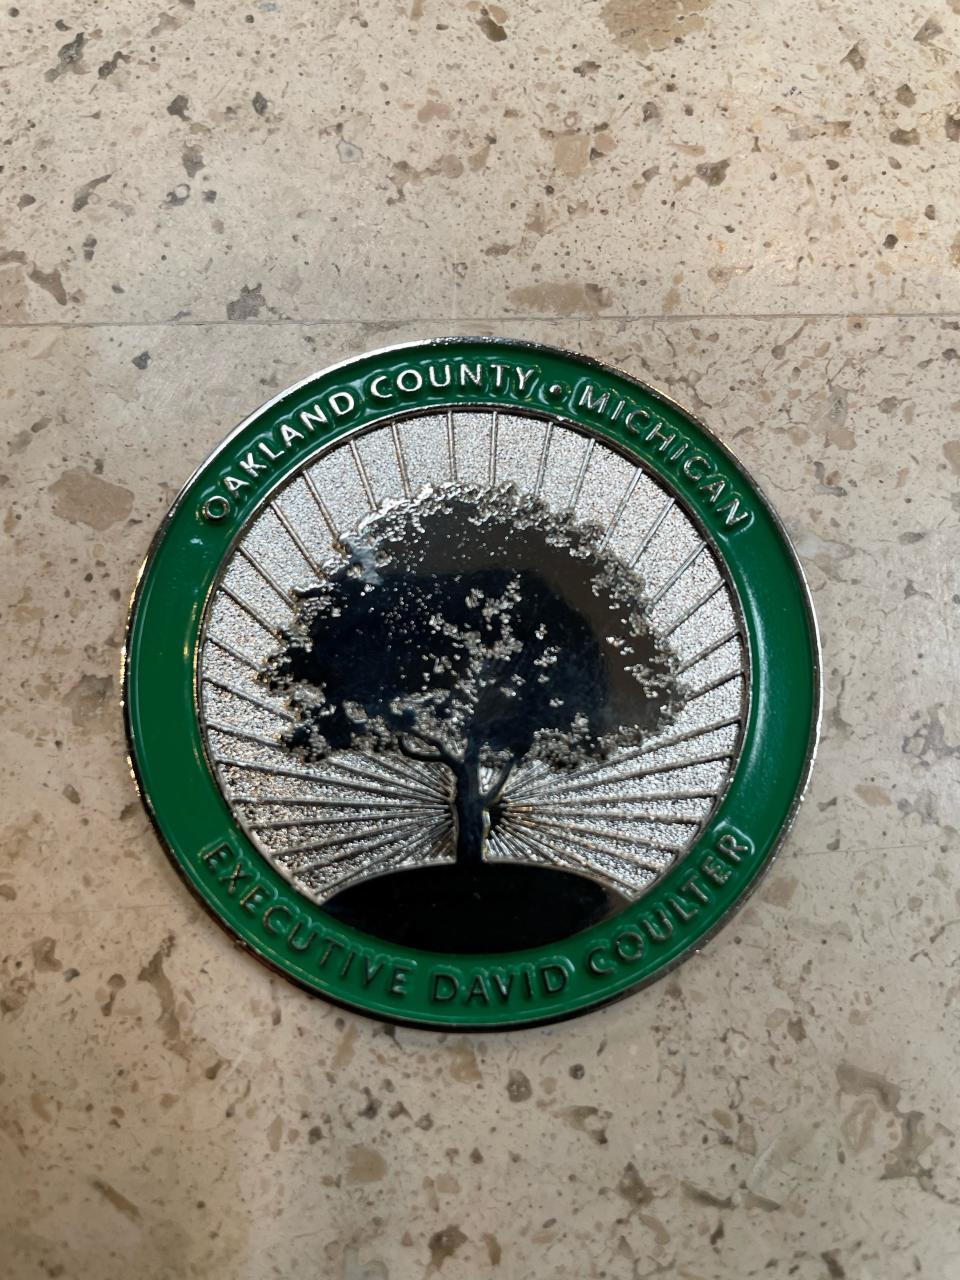 Obverse of the new Challenge Coin minted by Oakland County displays the oak tree logo and the name of Oakland County Executive David Coulter. He handed out hundreds of the keepsakes Tuesday night at a speech.